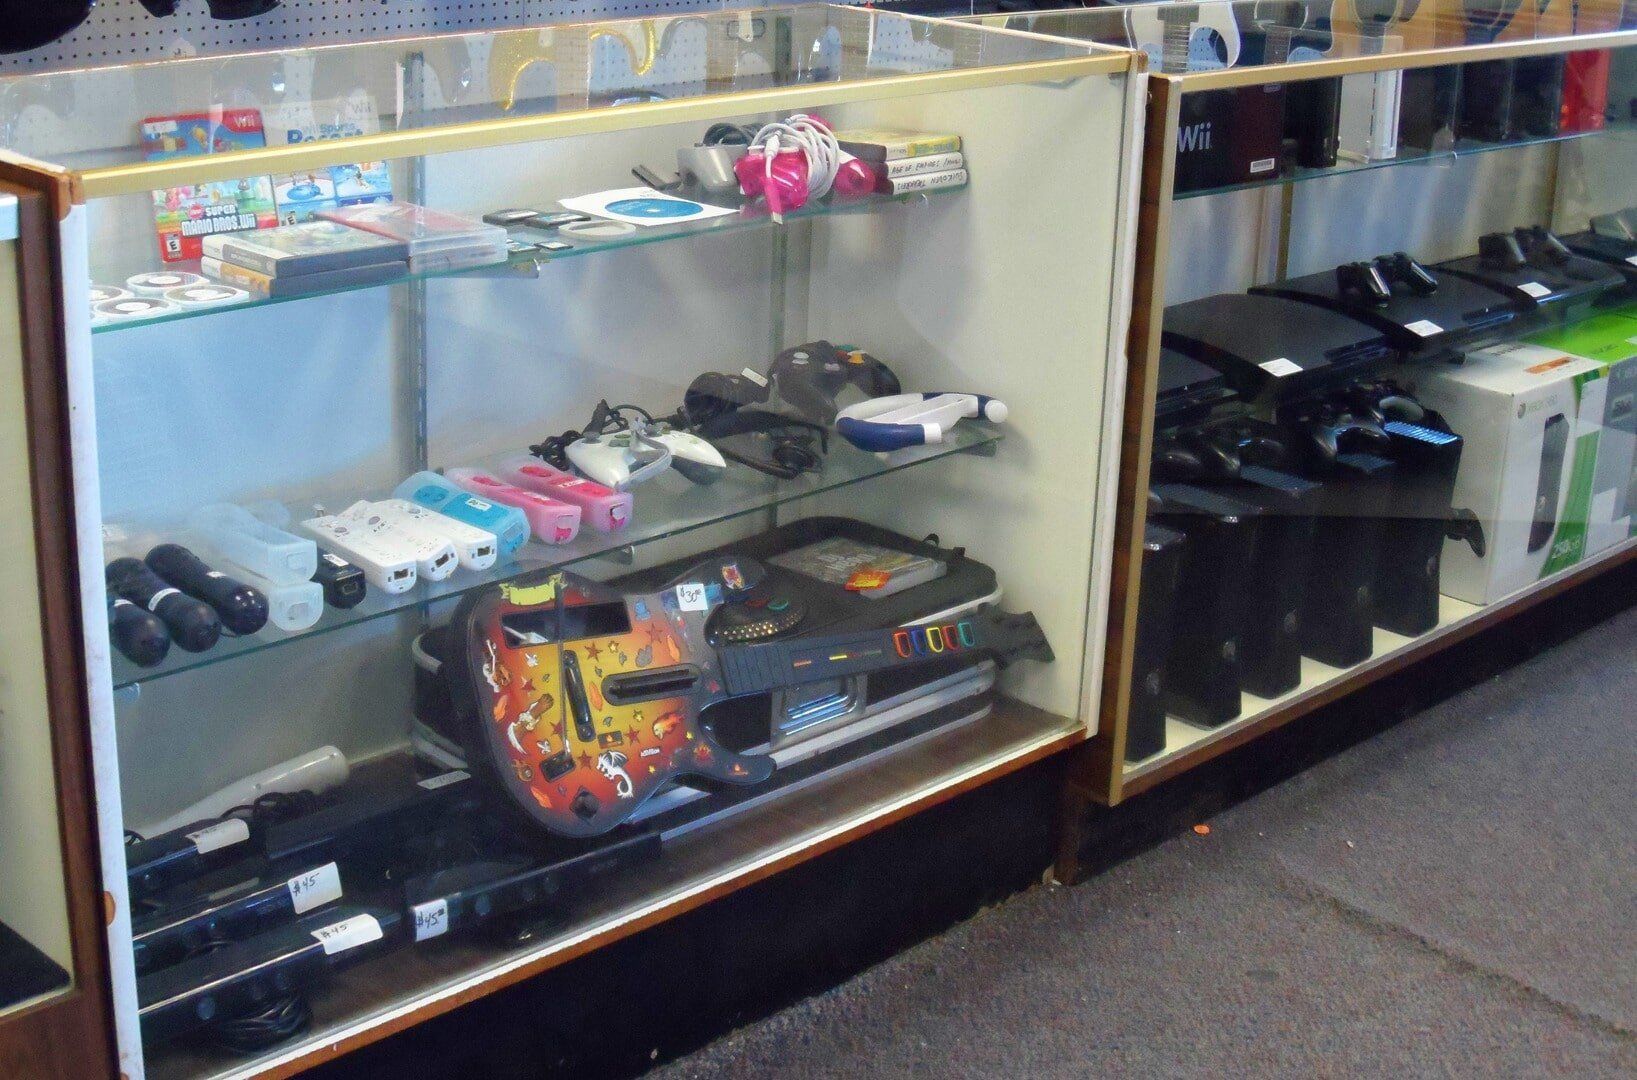 Shelf full of gaming materials - gaming systems in Victorville, CA